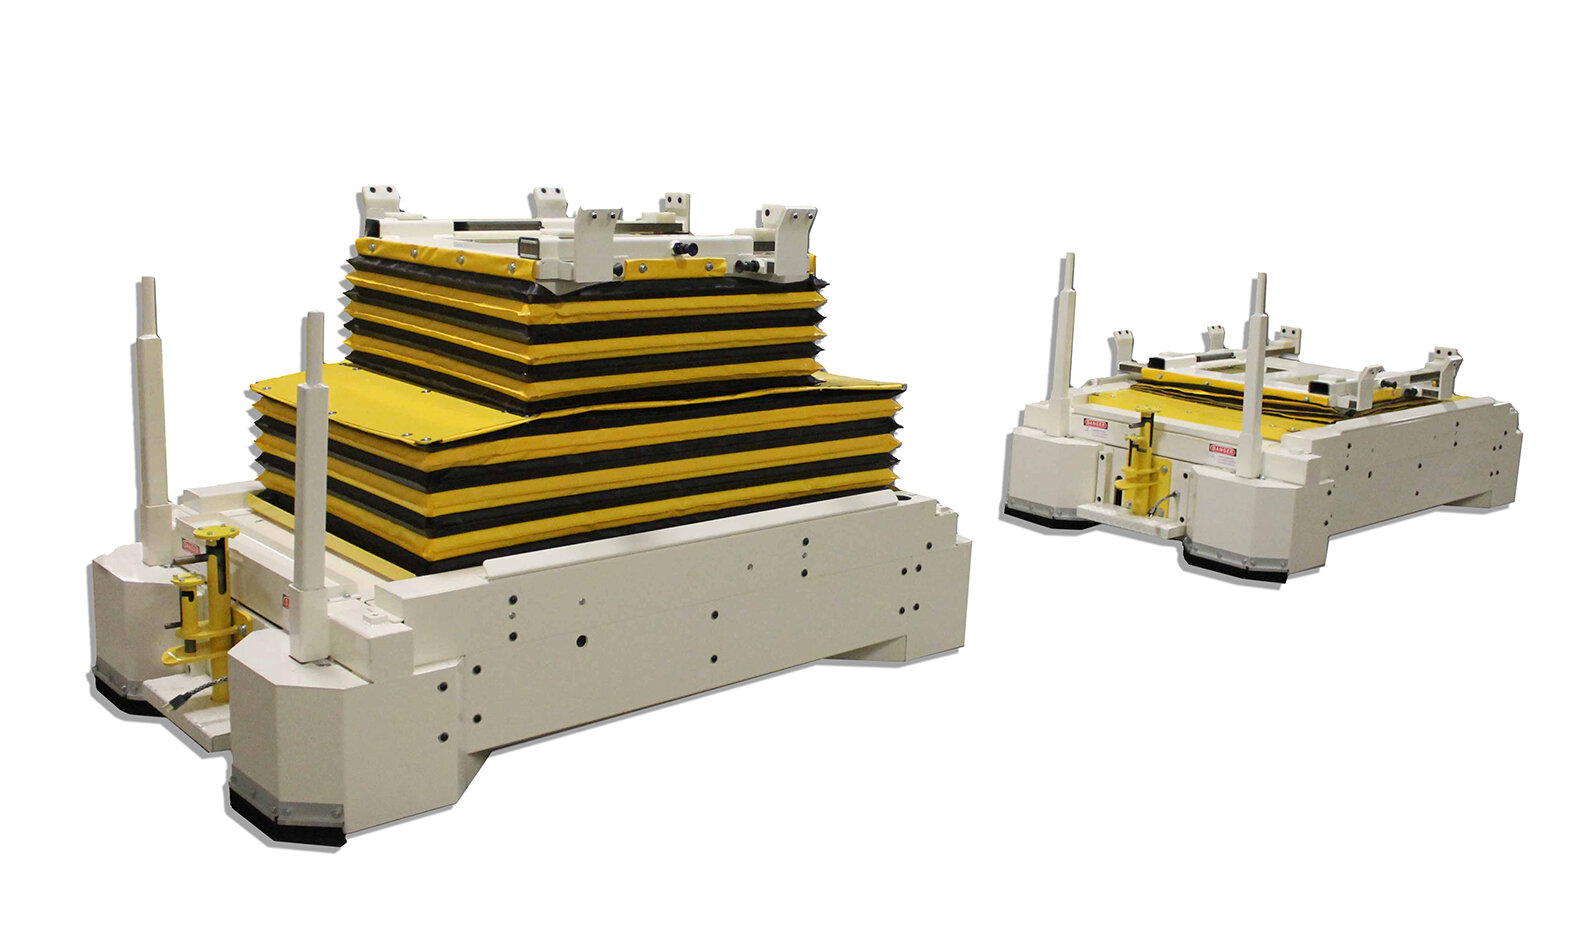 AGV Tow Cart and Automated Guided Vehicle (AGC)